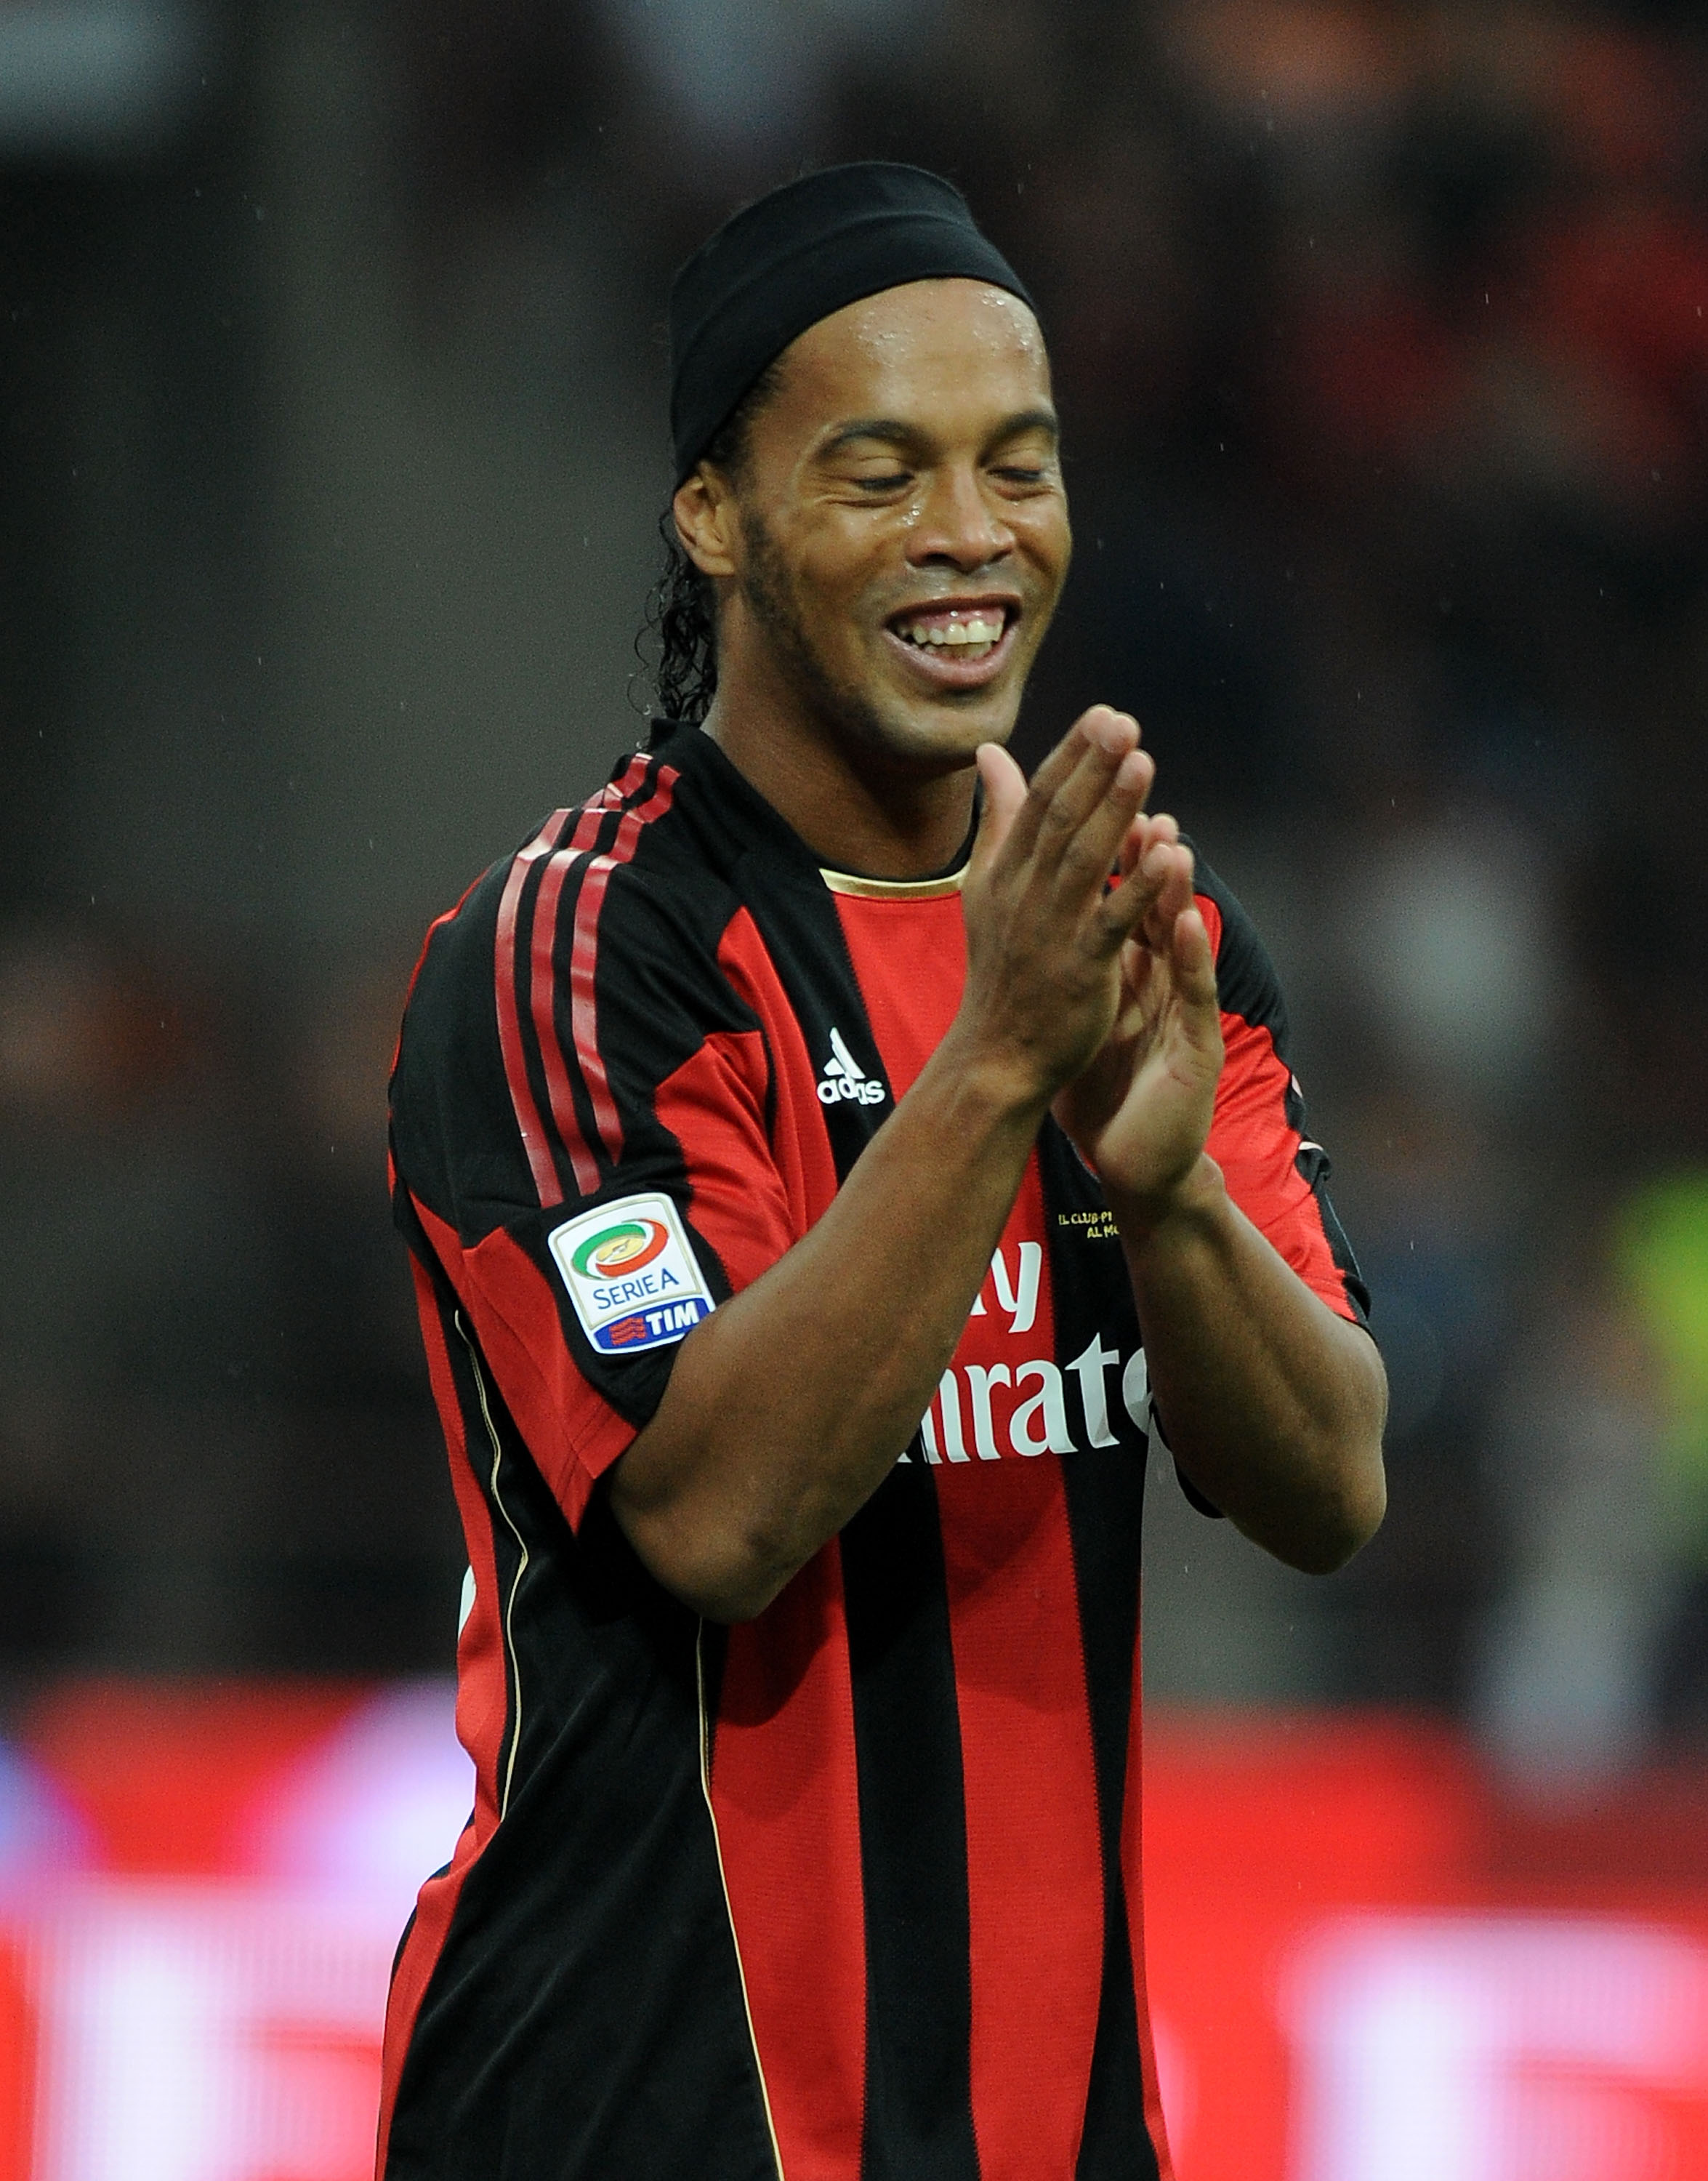 MILAN, ITALY - OCTOBER 16:  Ronaldinho of AC Milan reacts during the Serie A match between AC Milan and AC Chievo Verona at Stadio Giuseppe Meazza on October 16, 2010 in Milan, Italy.  (Photo by Massimo Cebrelli/Getty Images)